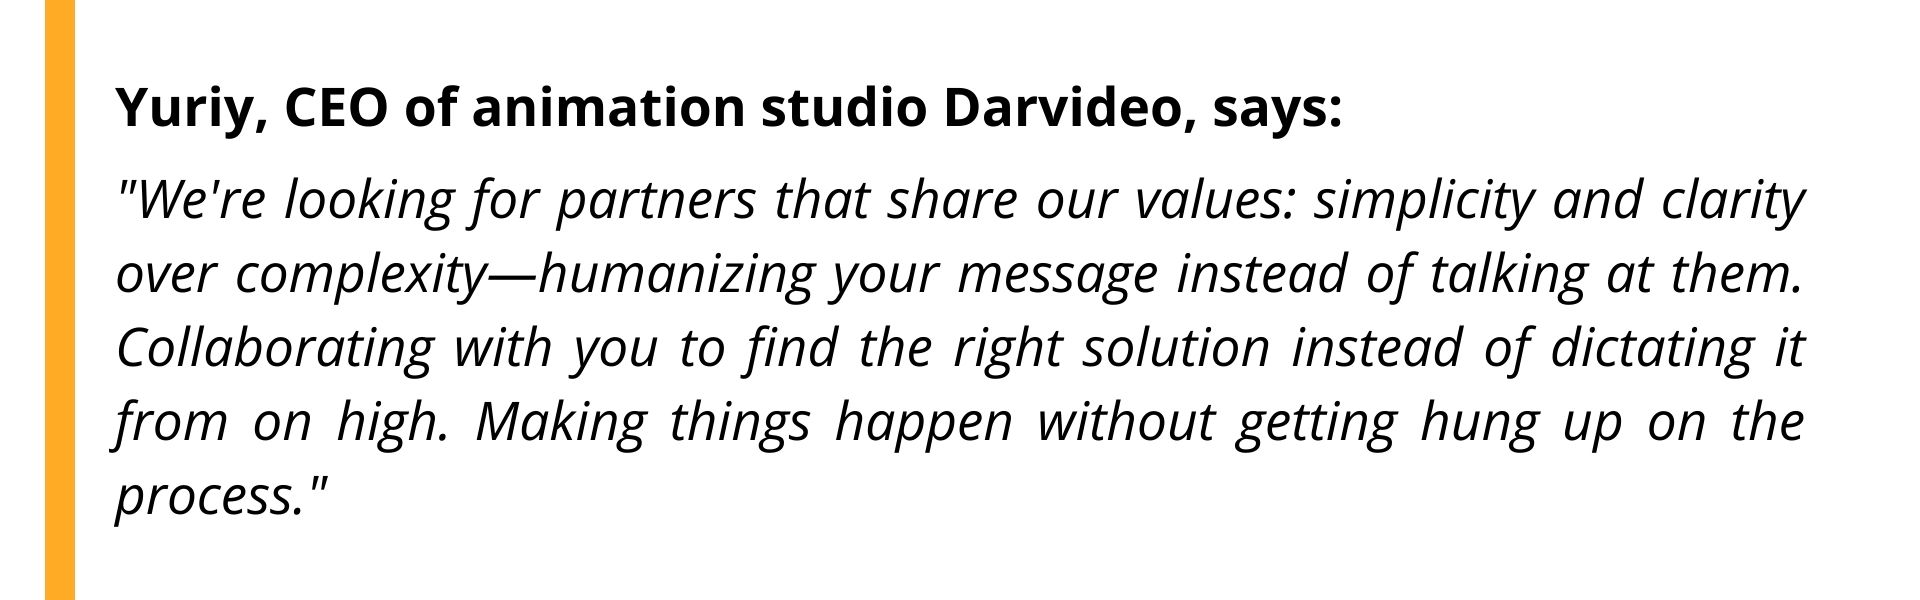 CEO Darvideo Yuri. A comment on animation videos